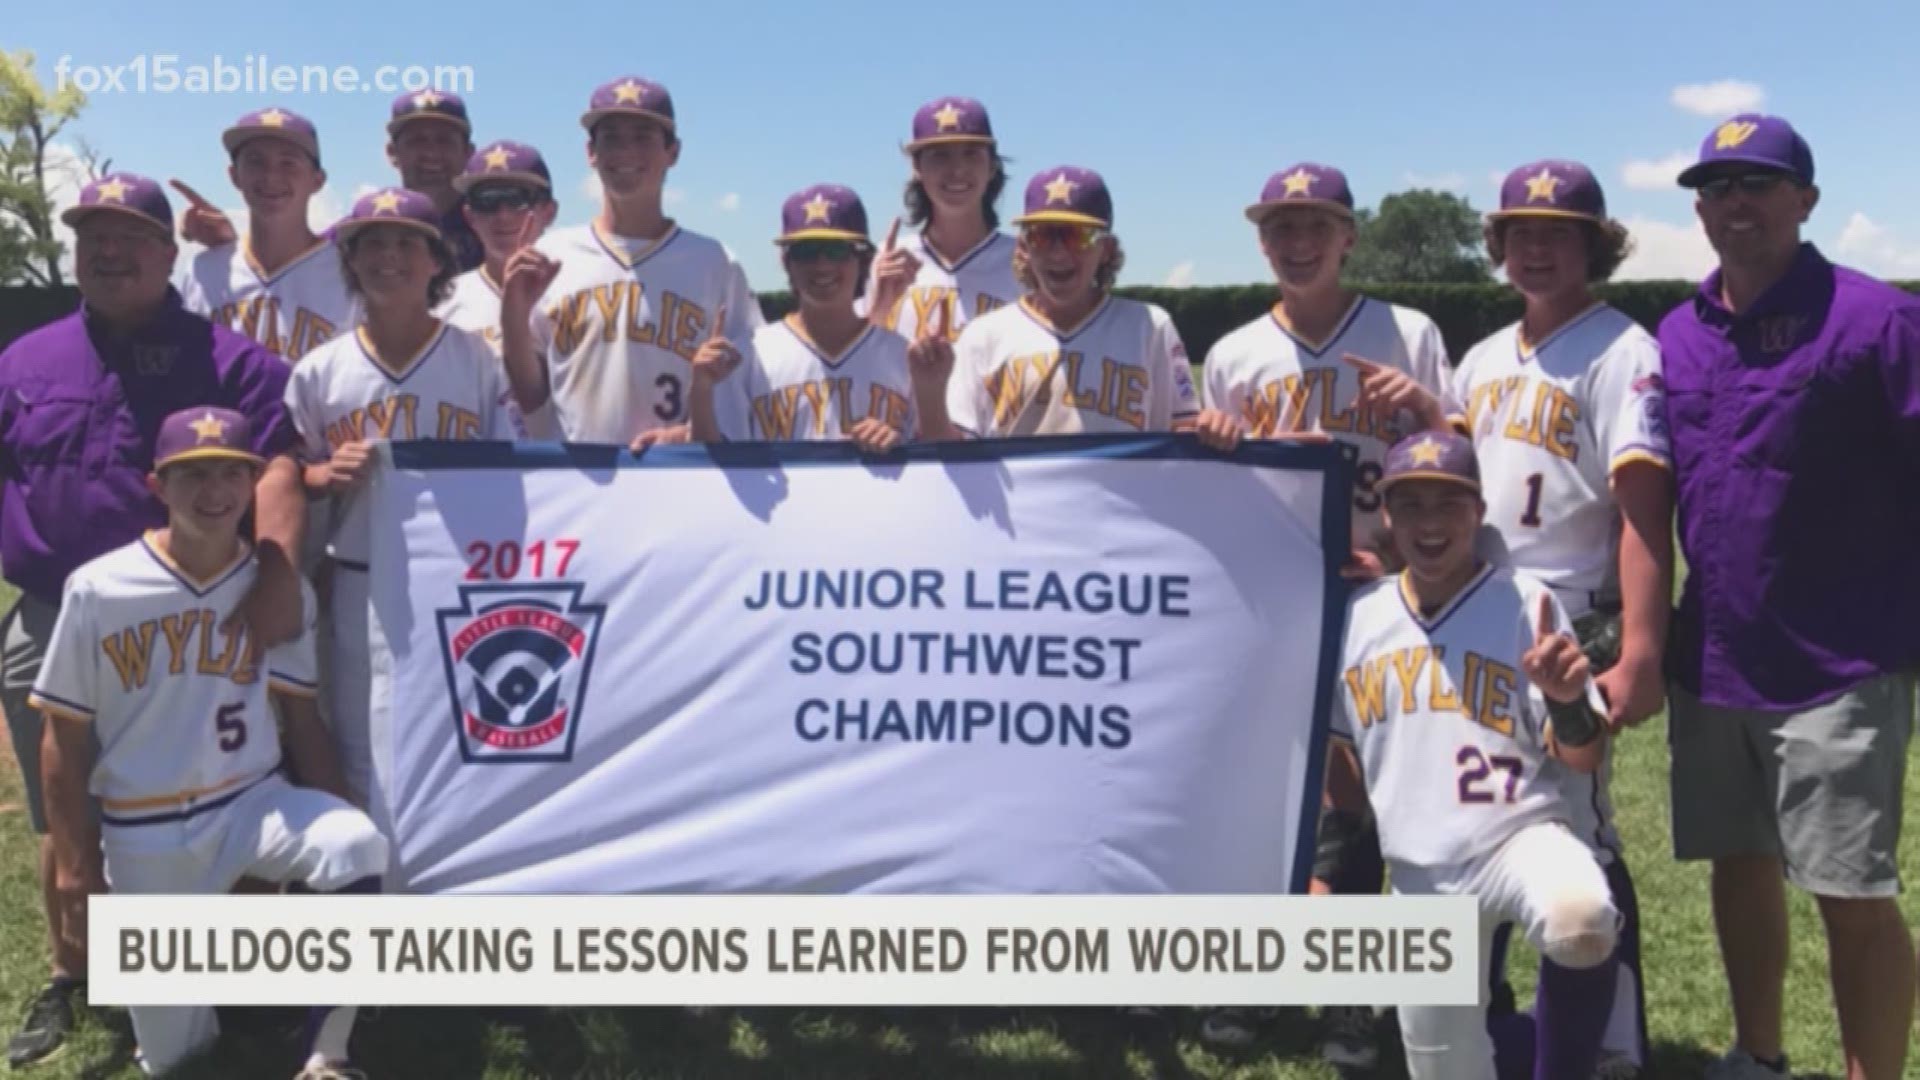 A year ago, the Wylie Little League team made an incredible run to the Little League World Series. Now, a year older and for some being the last year eligible for Little League play, they're looking to use the lessons learned a season ago to have another 